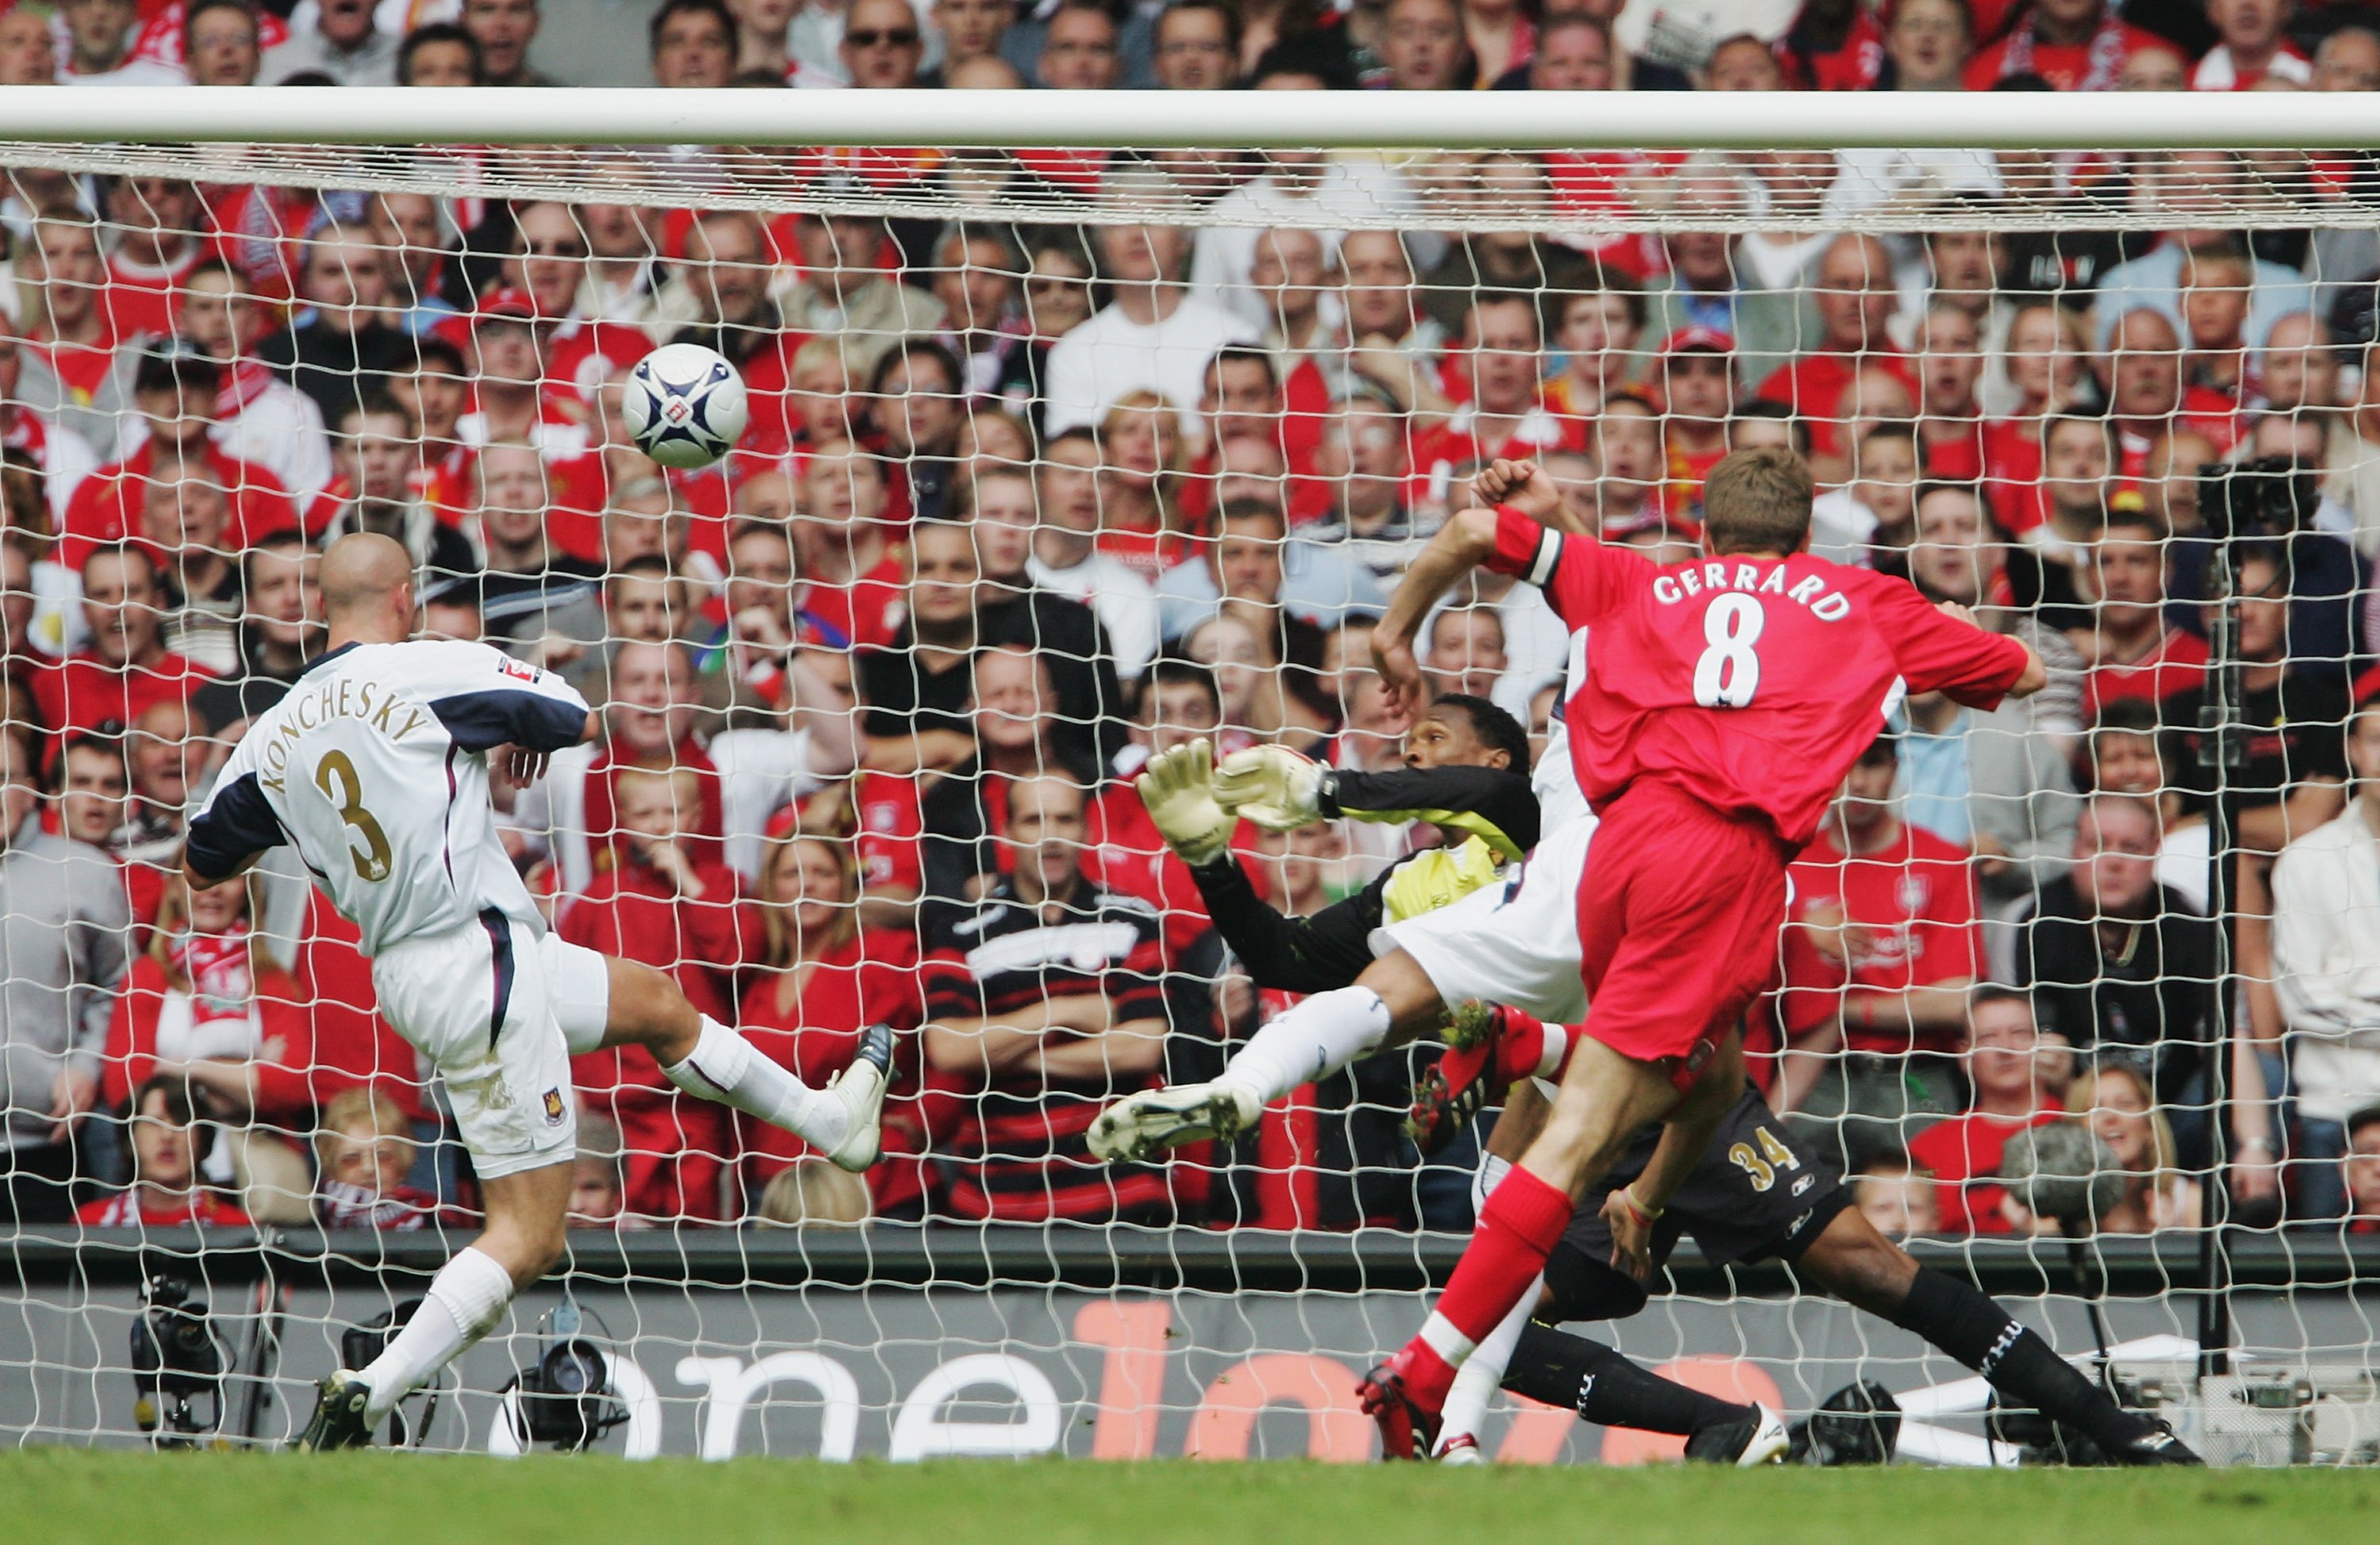 CARDIFF, UNITED KINGDOM - MAY 13:  Steven Gerrard of Liverpool shoots and scores his sides first goal during the FA Cup Final match between Liverpool and West Ham United at the Millennium Stadium on May 13, 2006 in Cardiff, Wales.  (Photo by Phil Cole/Get